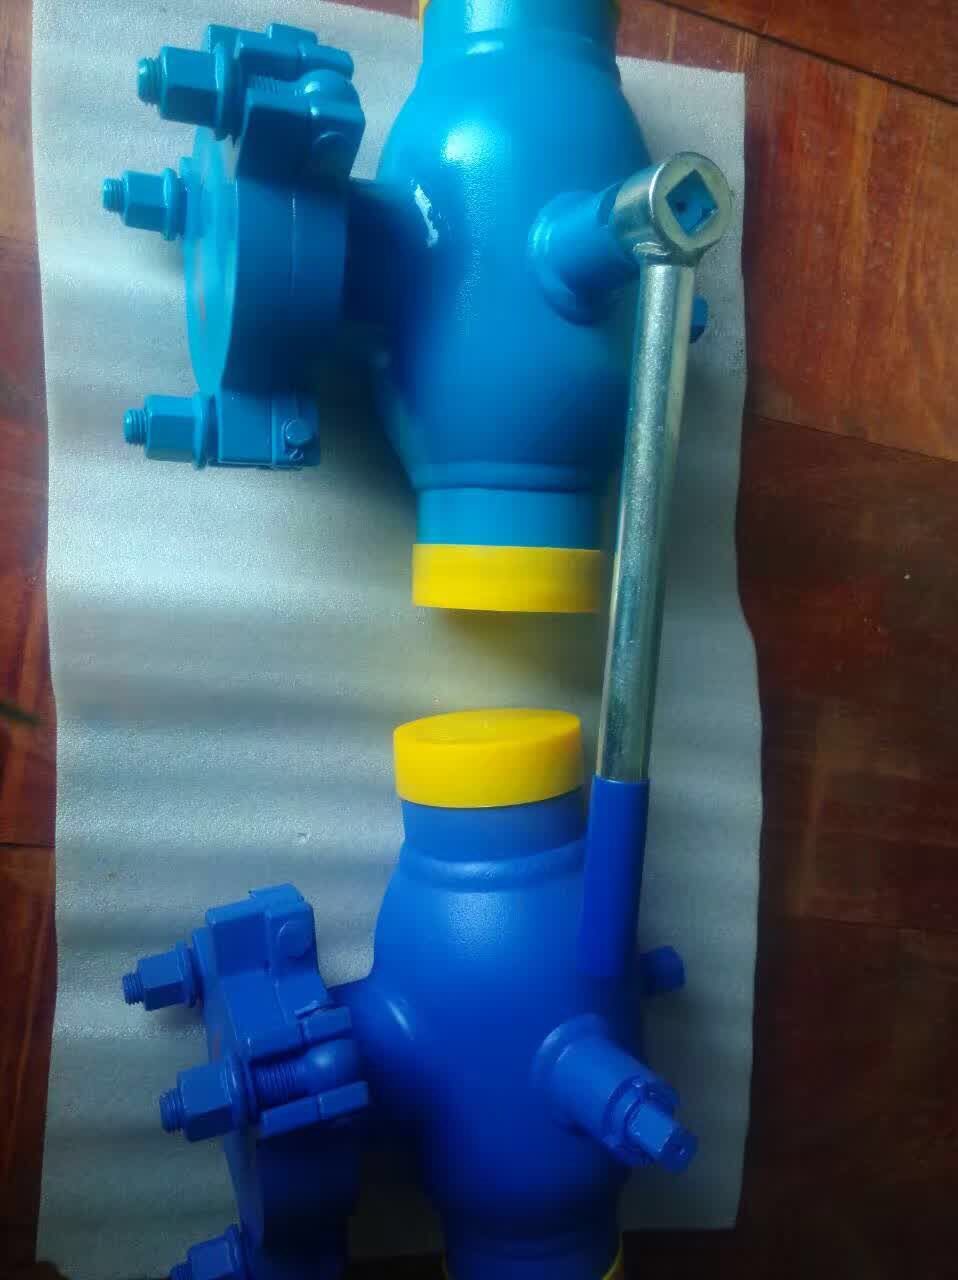 Welded ball valve with filter handle